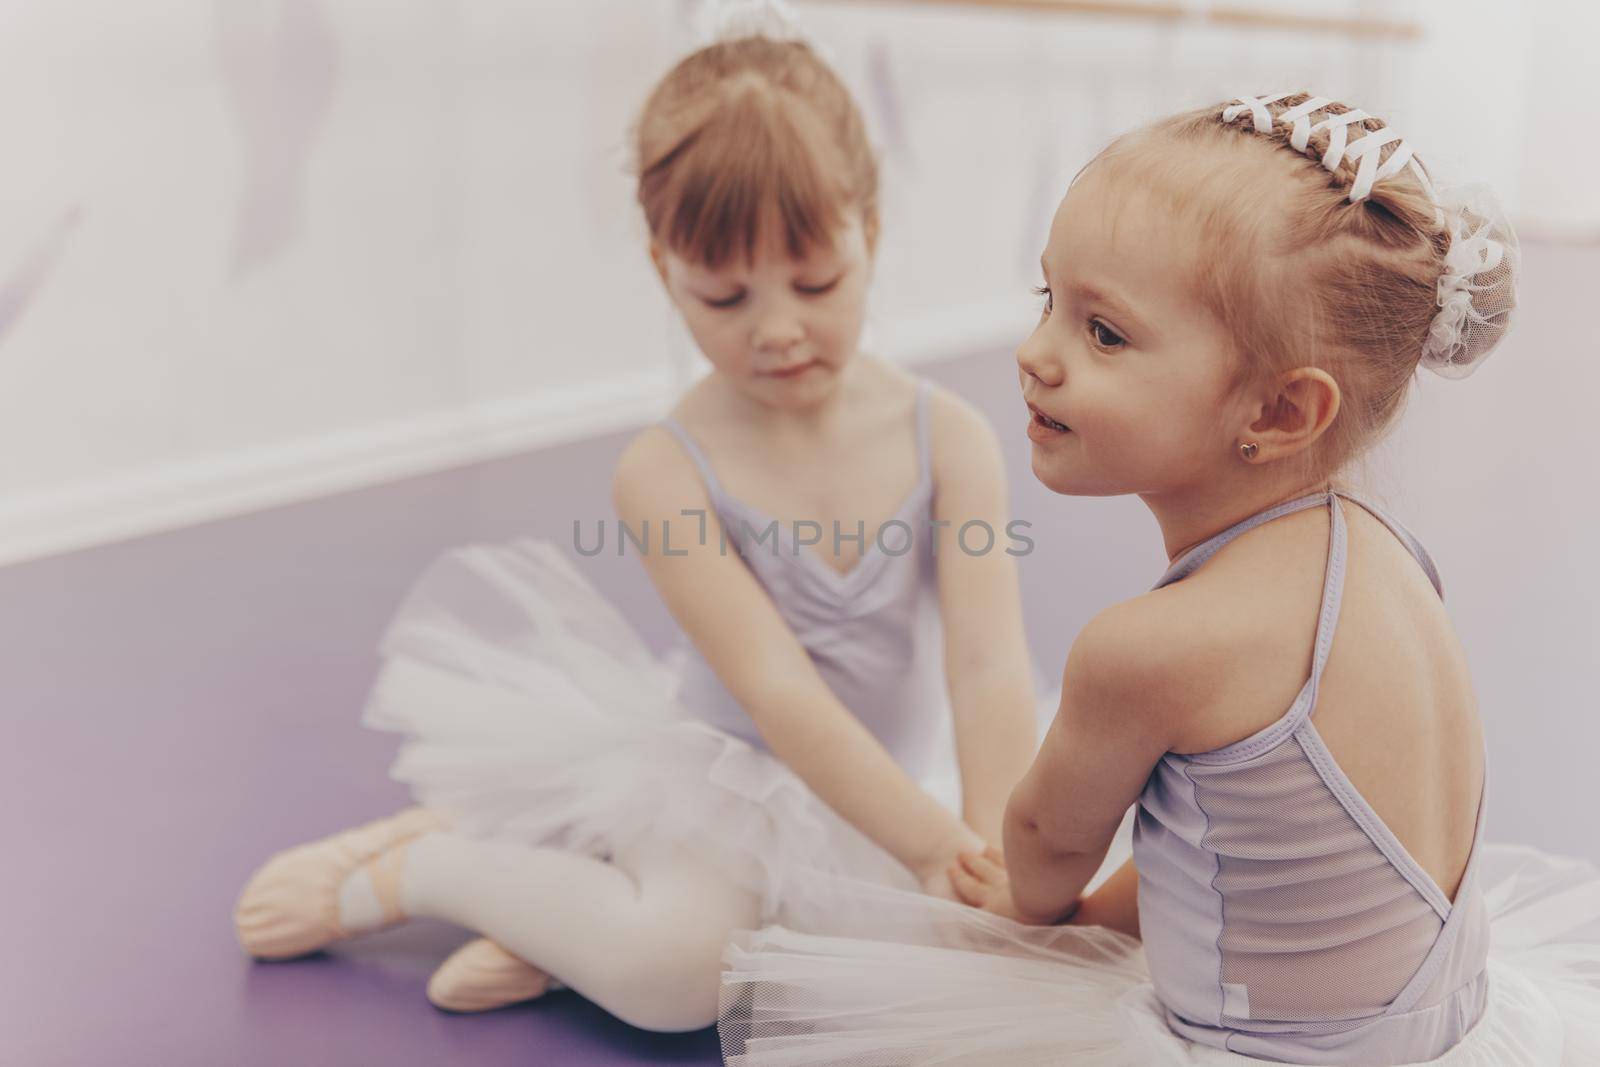 Lovely little girl sitting on the floor with her best friend at ballet school. Cute little ballerinas in leotards and tutu skirts resting after dancing, copy space. Friendship, innocence concept